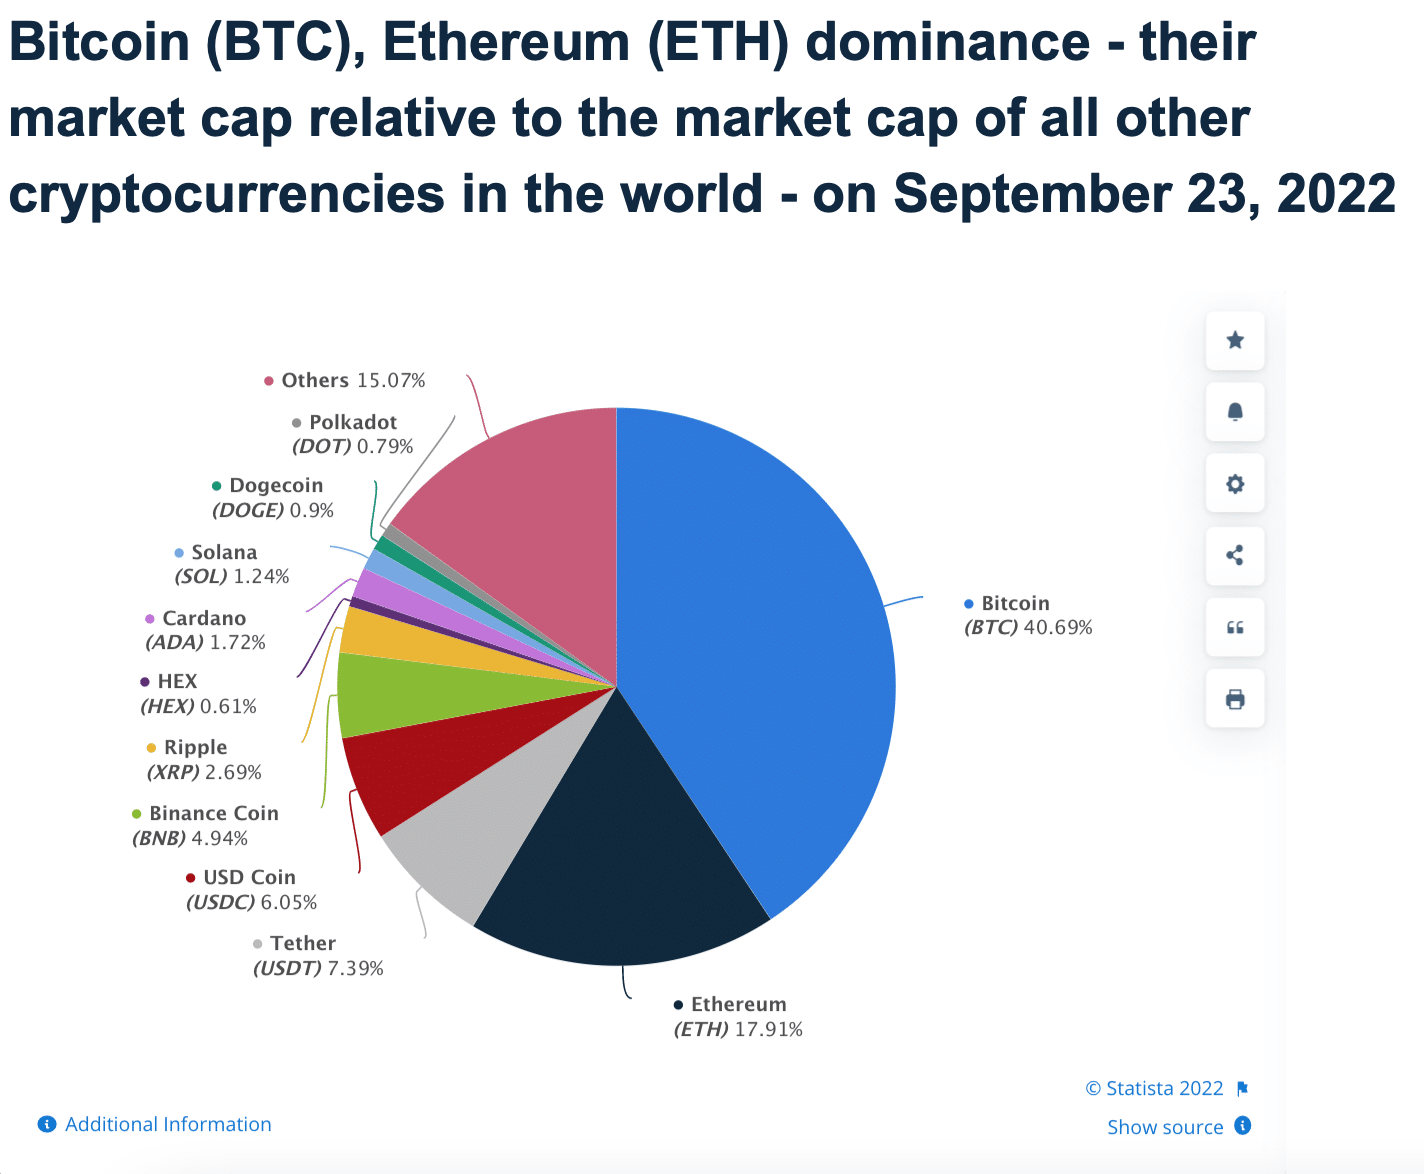 Bitcoin market cap is over 40% compared to other cryptocurrencies